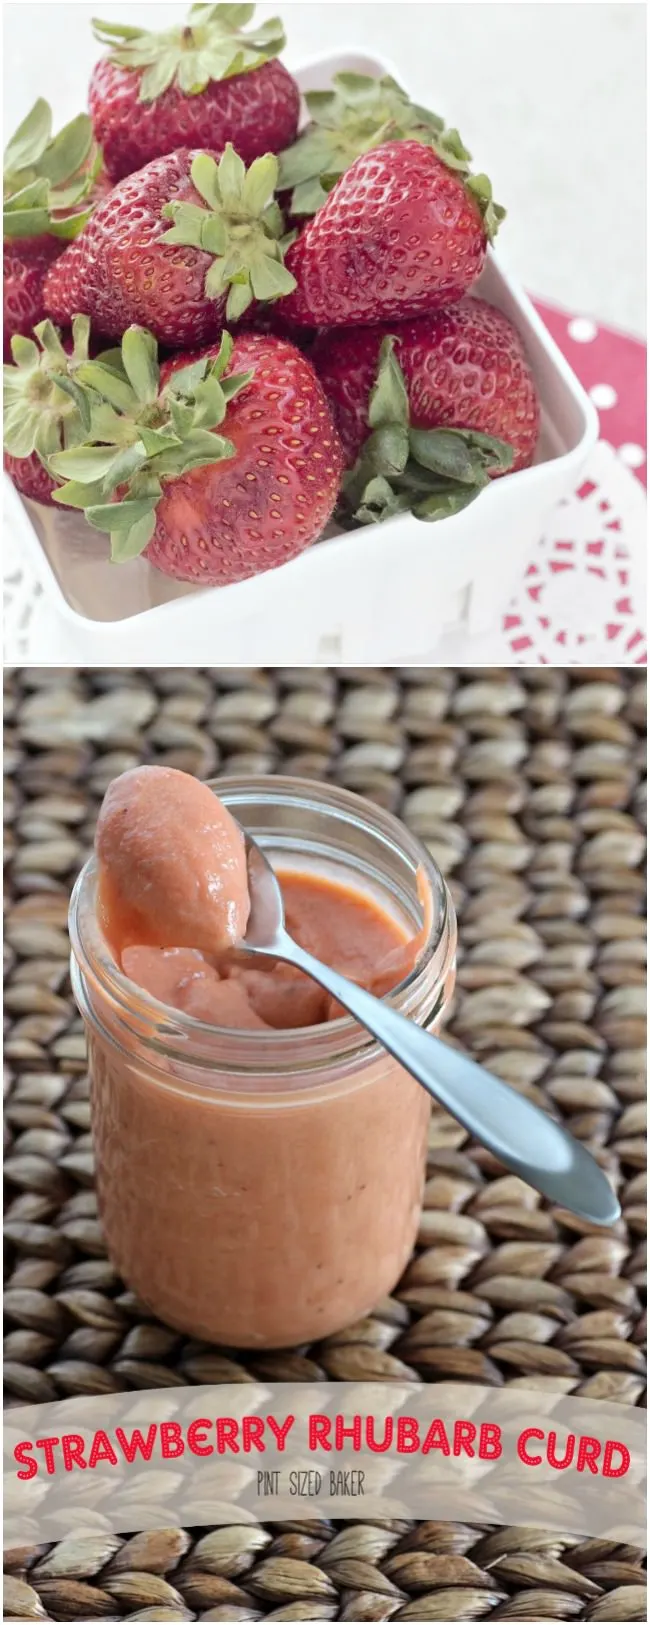 Pick some fresh strawberries and cook them with some fresh rhubarb for this amazing homemade strawberry rhubarb curd recipe.